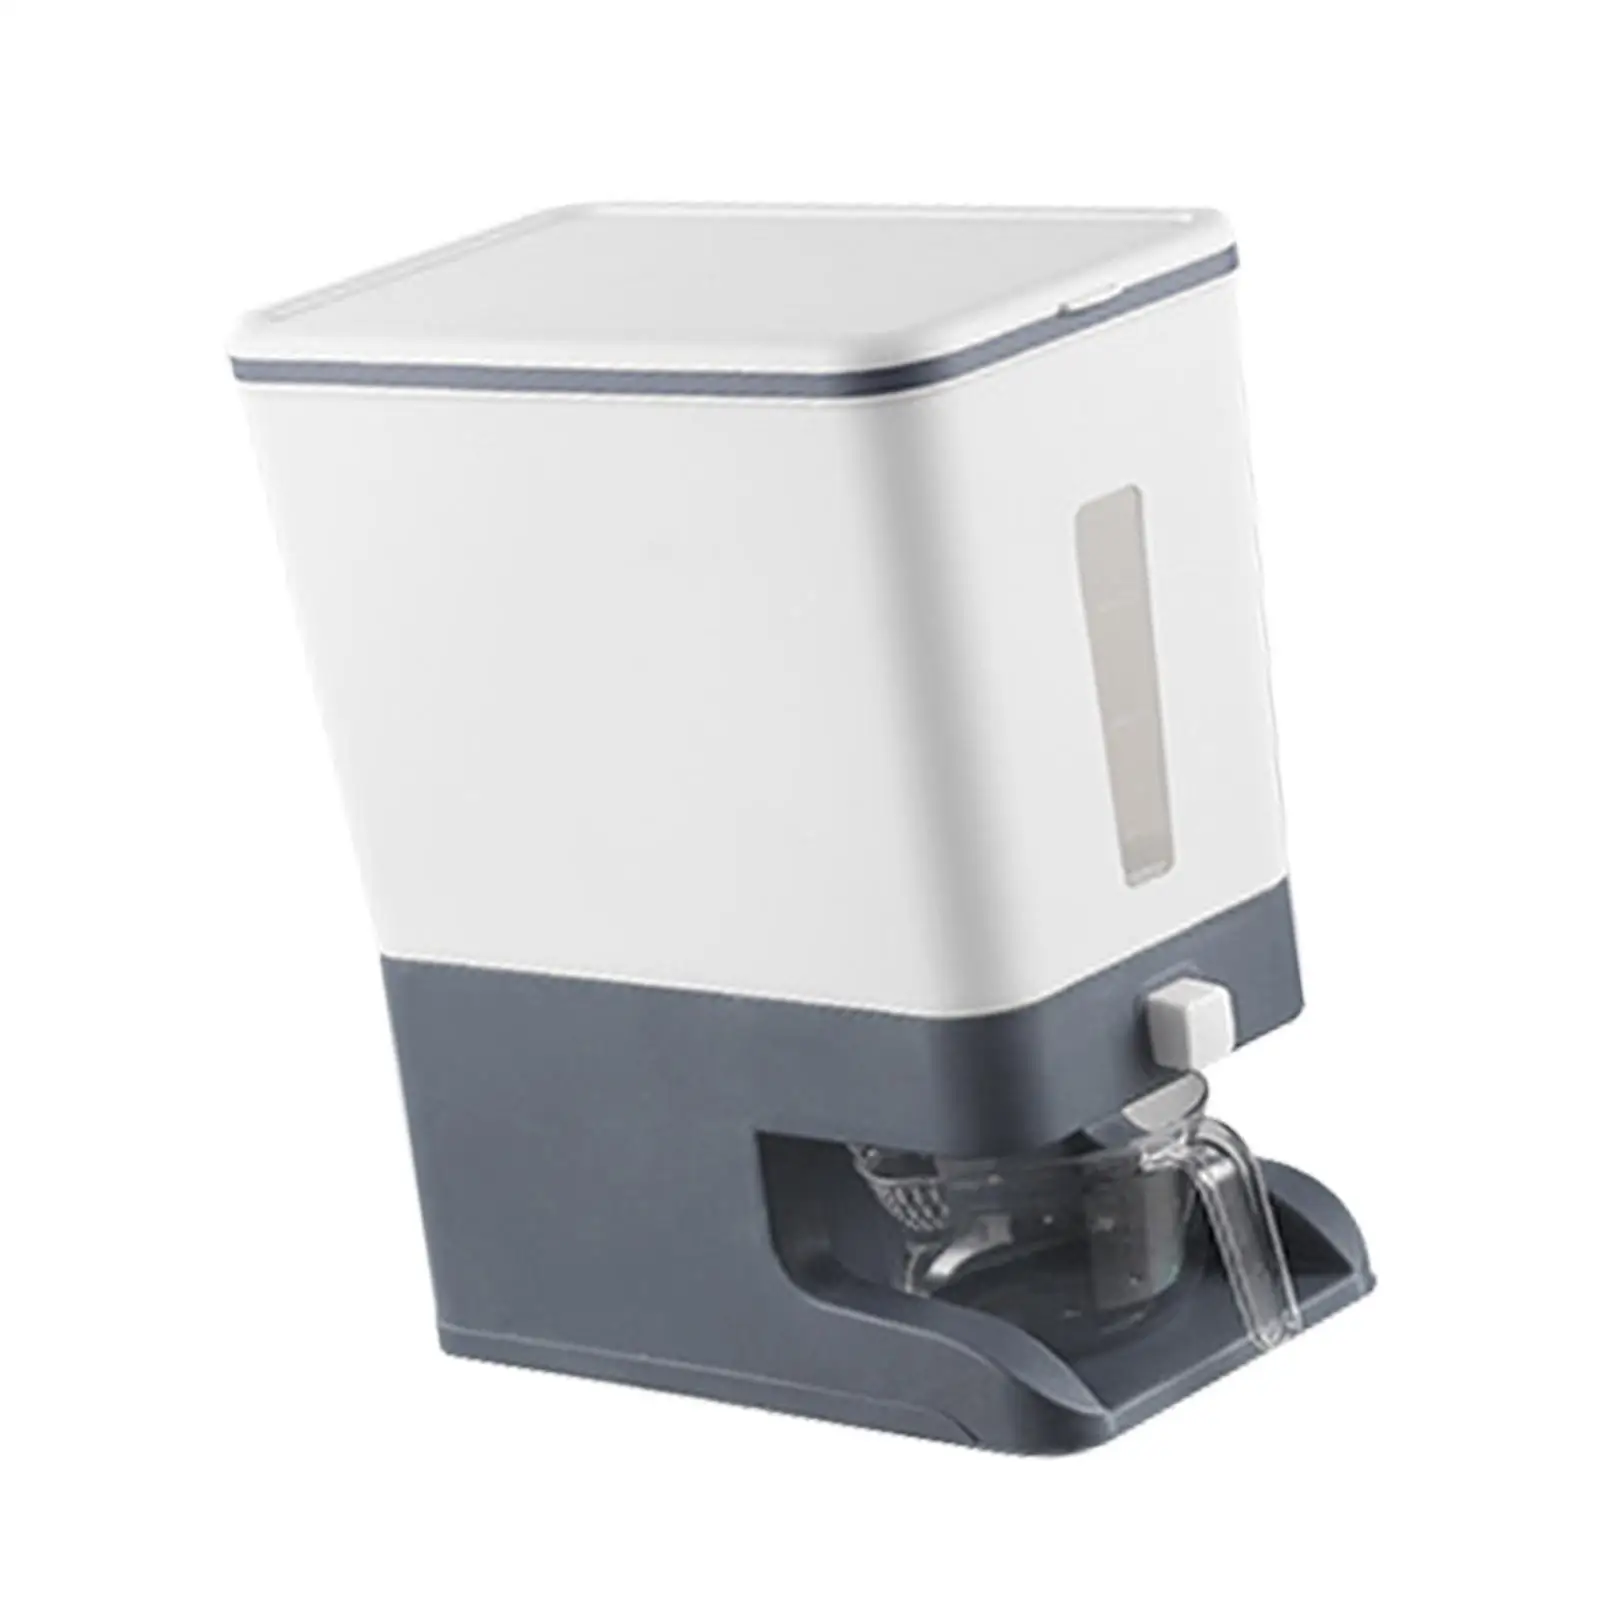 10kg Rice Dispenser Rice Storage Bin Sealed Lid Multifunctional Storage Container for Beans Flour Snacks